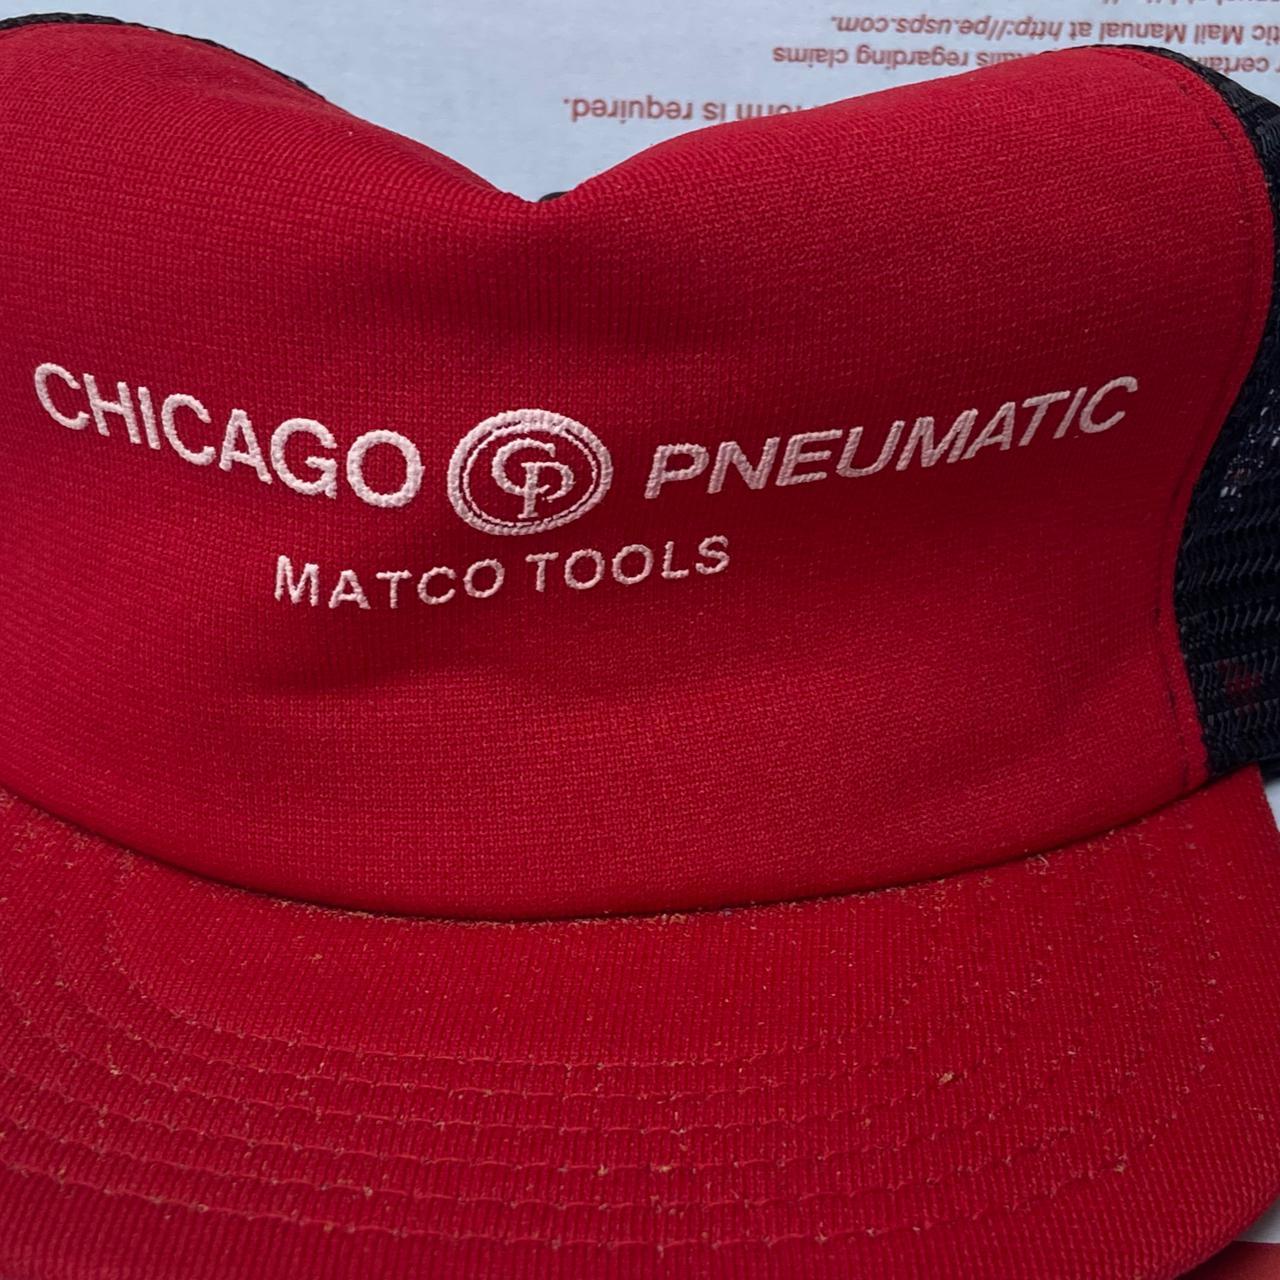 Product Image 2 - Chicago Pneumatic CP Matco tools